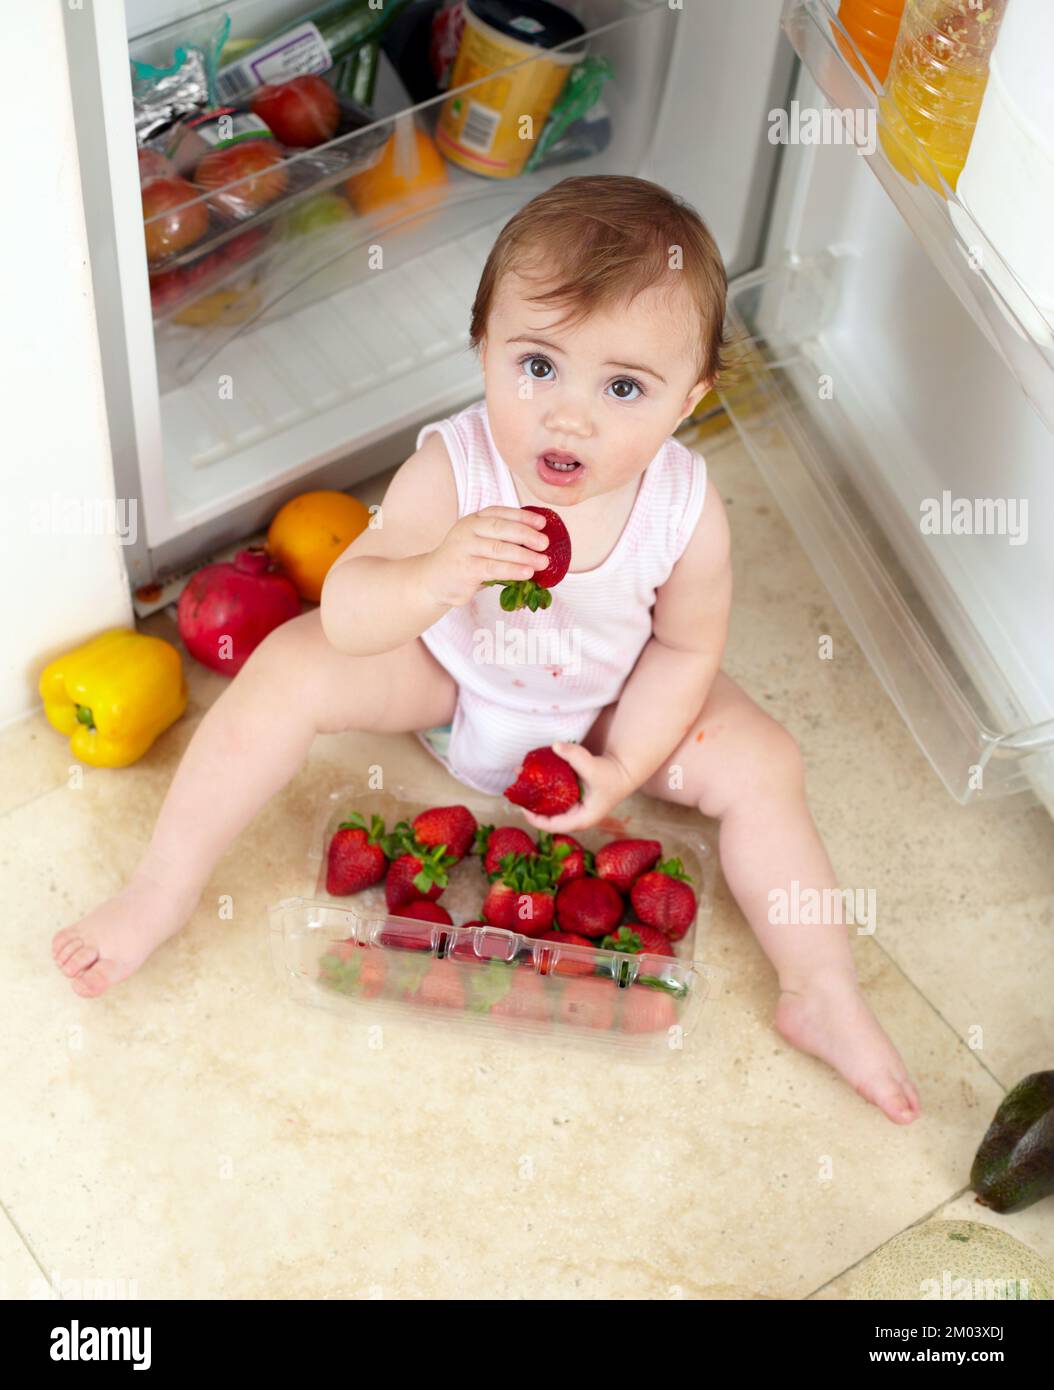 Caught in the act. High angle shot of an adorable toddler eating a strawberry after raiding the fridge. Stock Photo